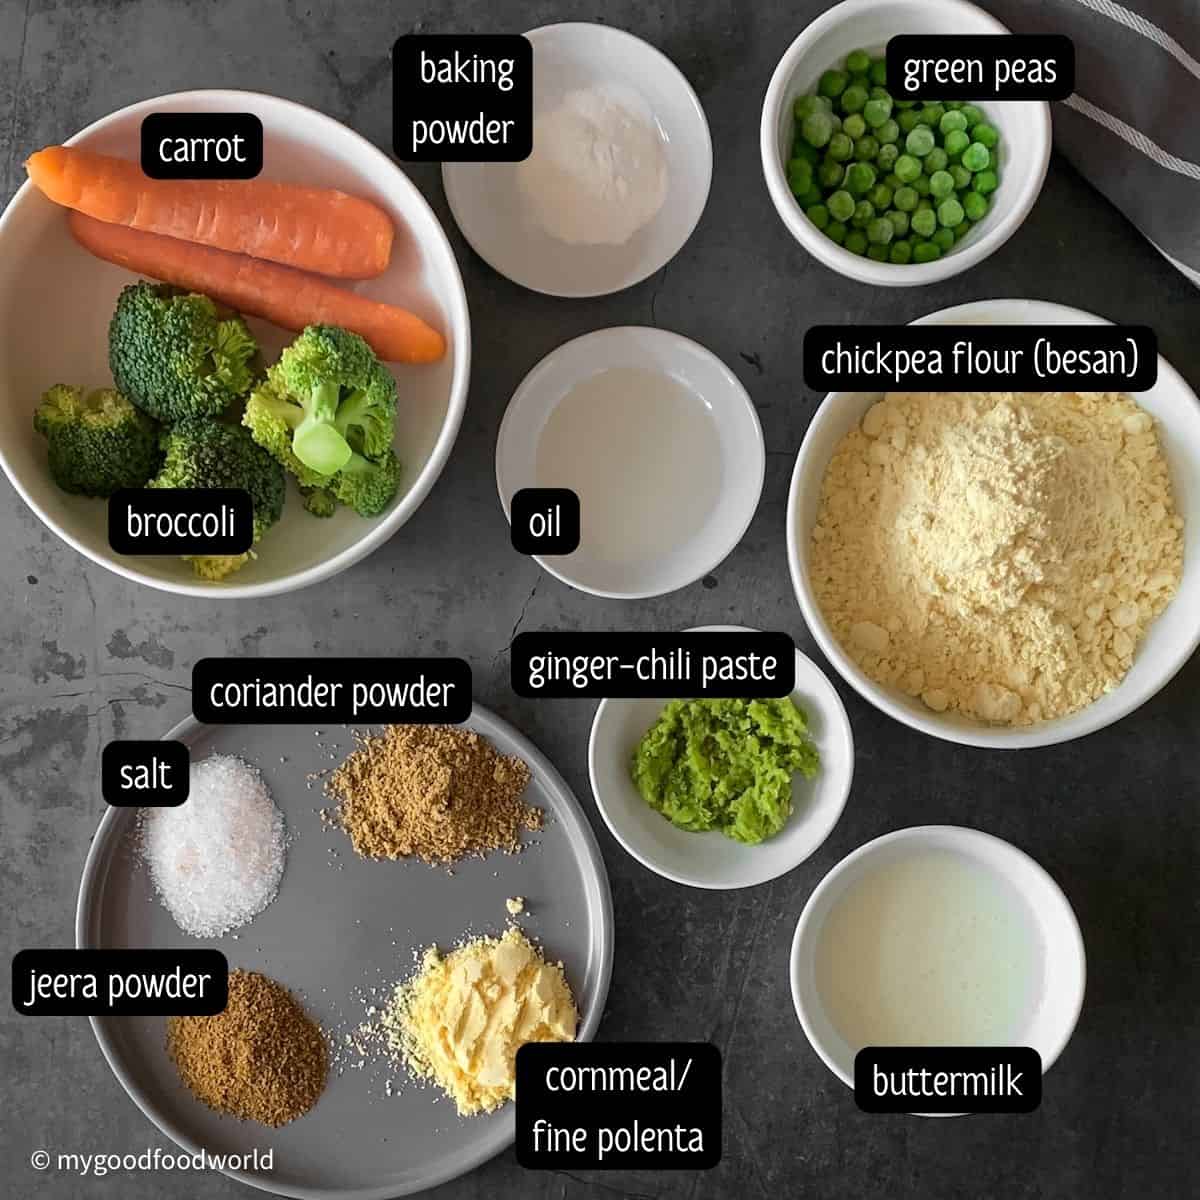 Chickpea flour, buttermilk, veggies, baking powder, spices and other ingredients are placed in bowls and on plates.